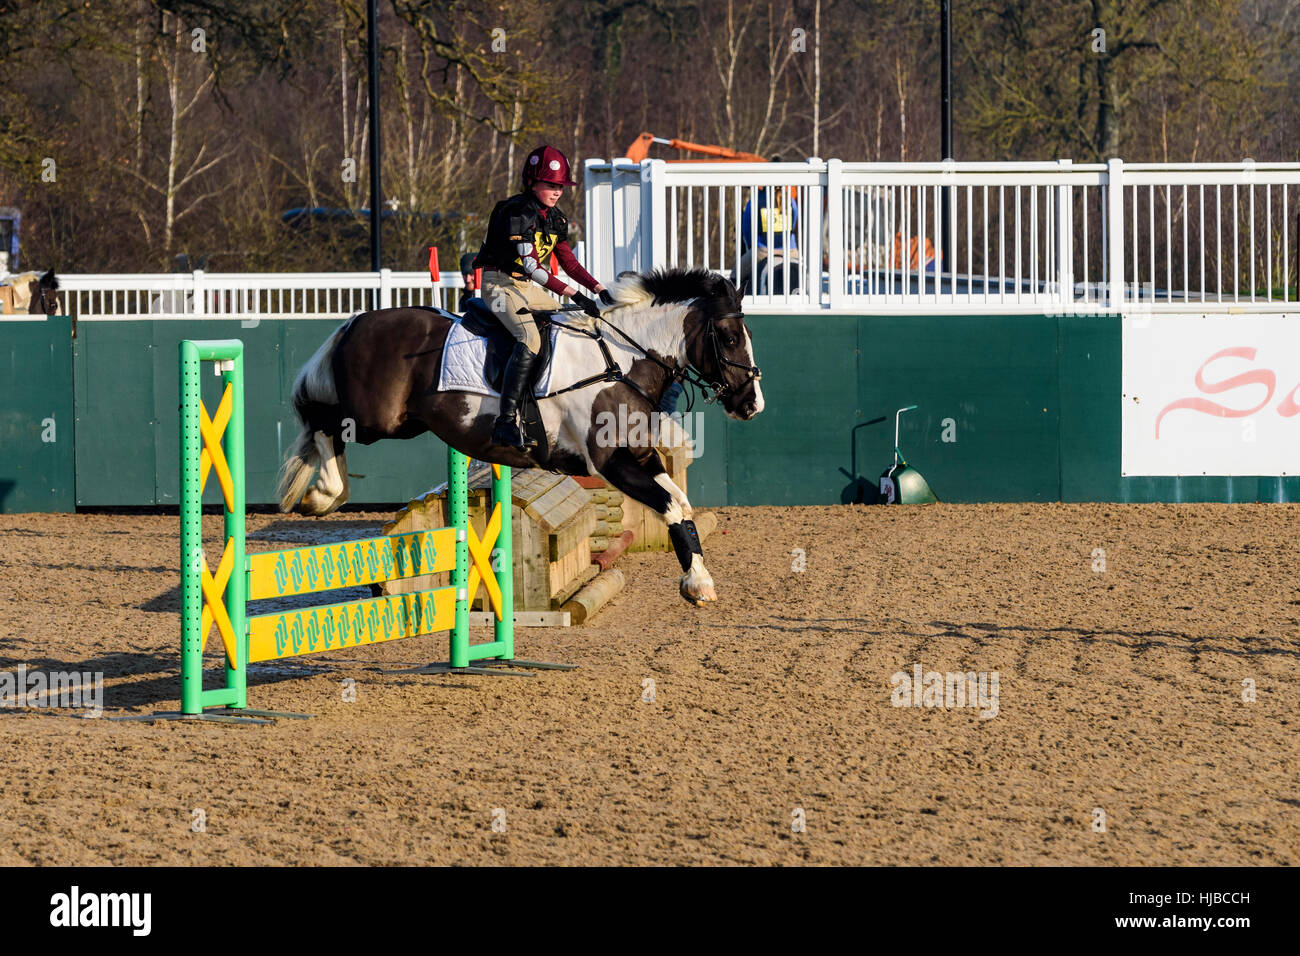 Female rider on her horse mid jump over a fence at a competition. Stock Photo